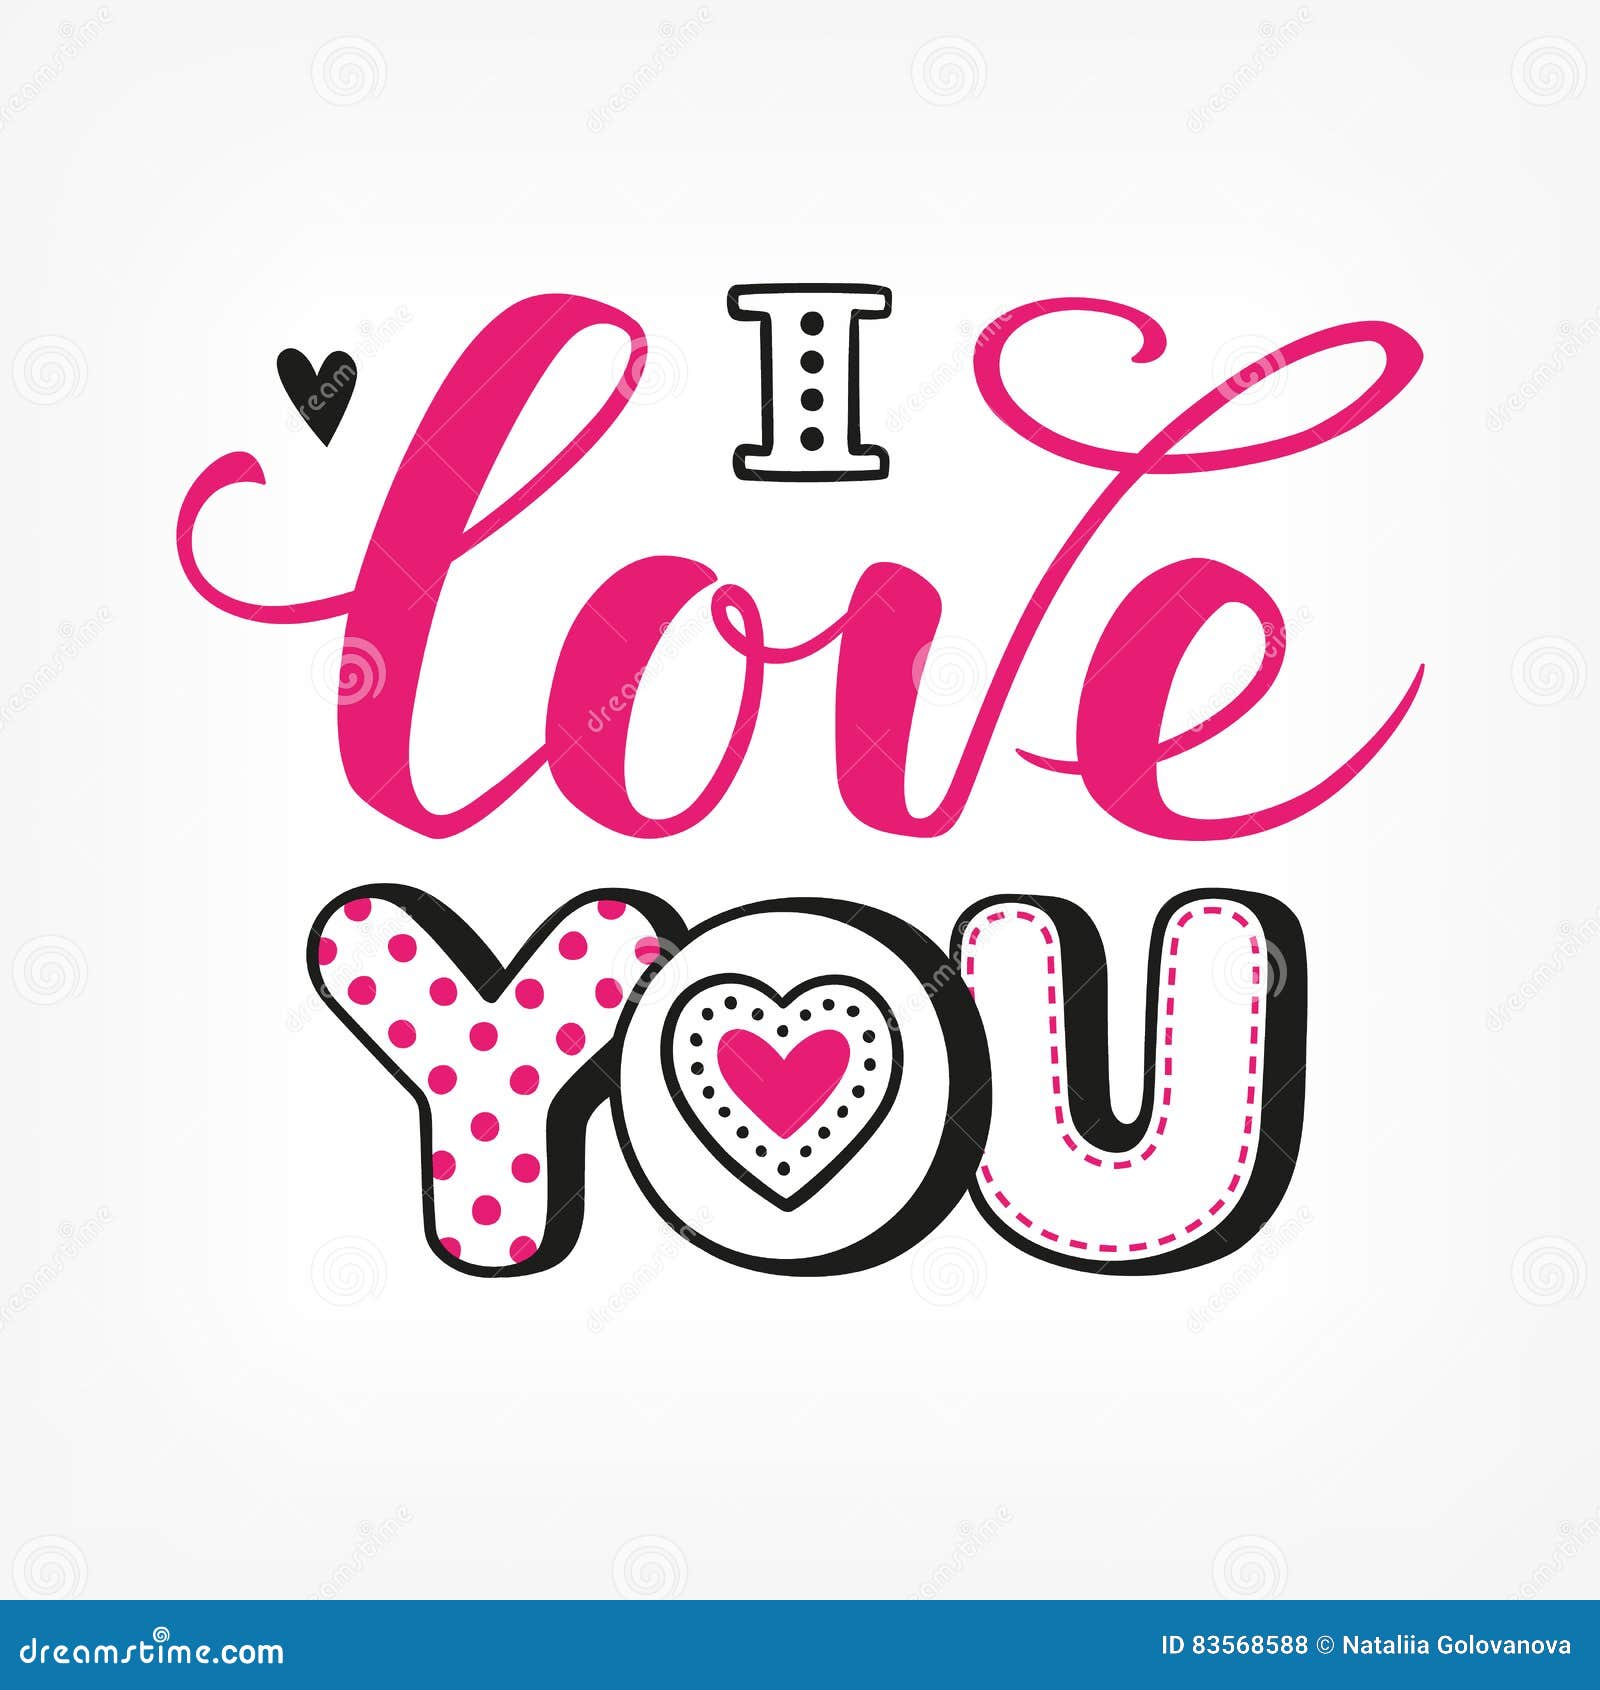 I Love You Calligraphic Lettering Stock Vector - Illustration of drawn ...